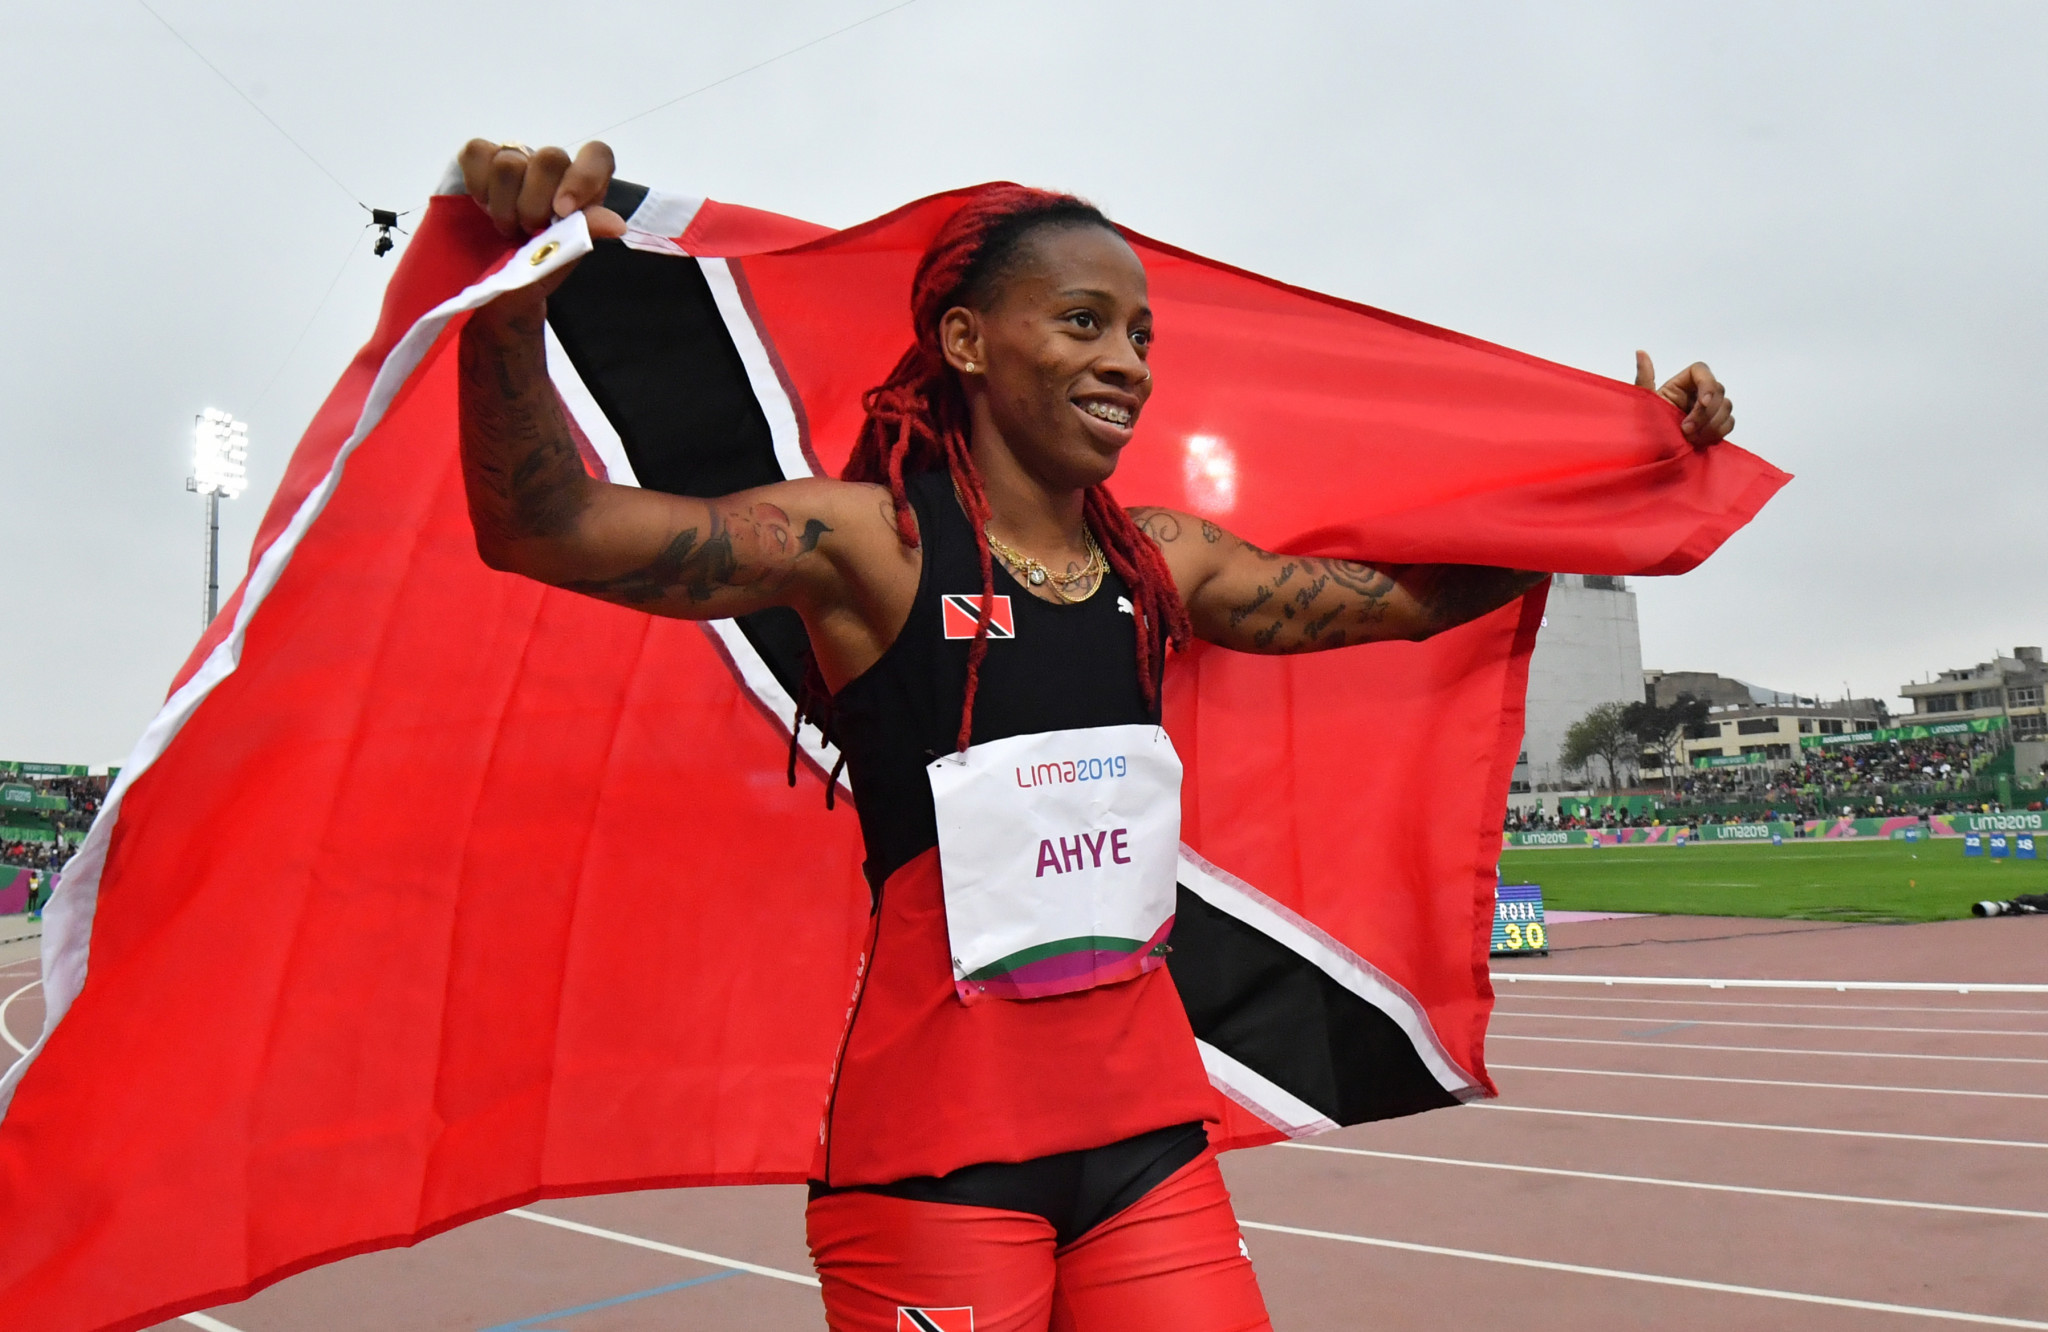 Trinidad and Tobago sprinter Ahye suspended after alleged whereabouts failures